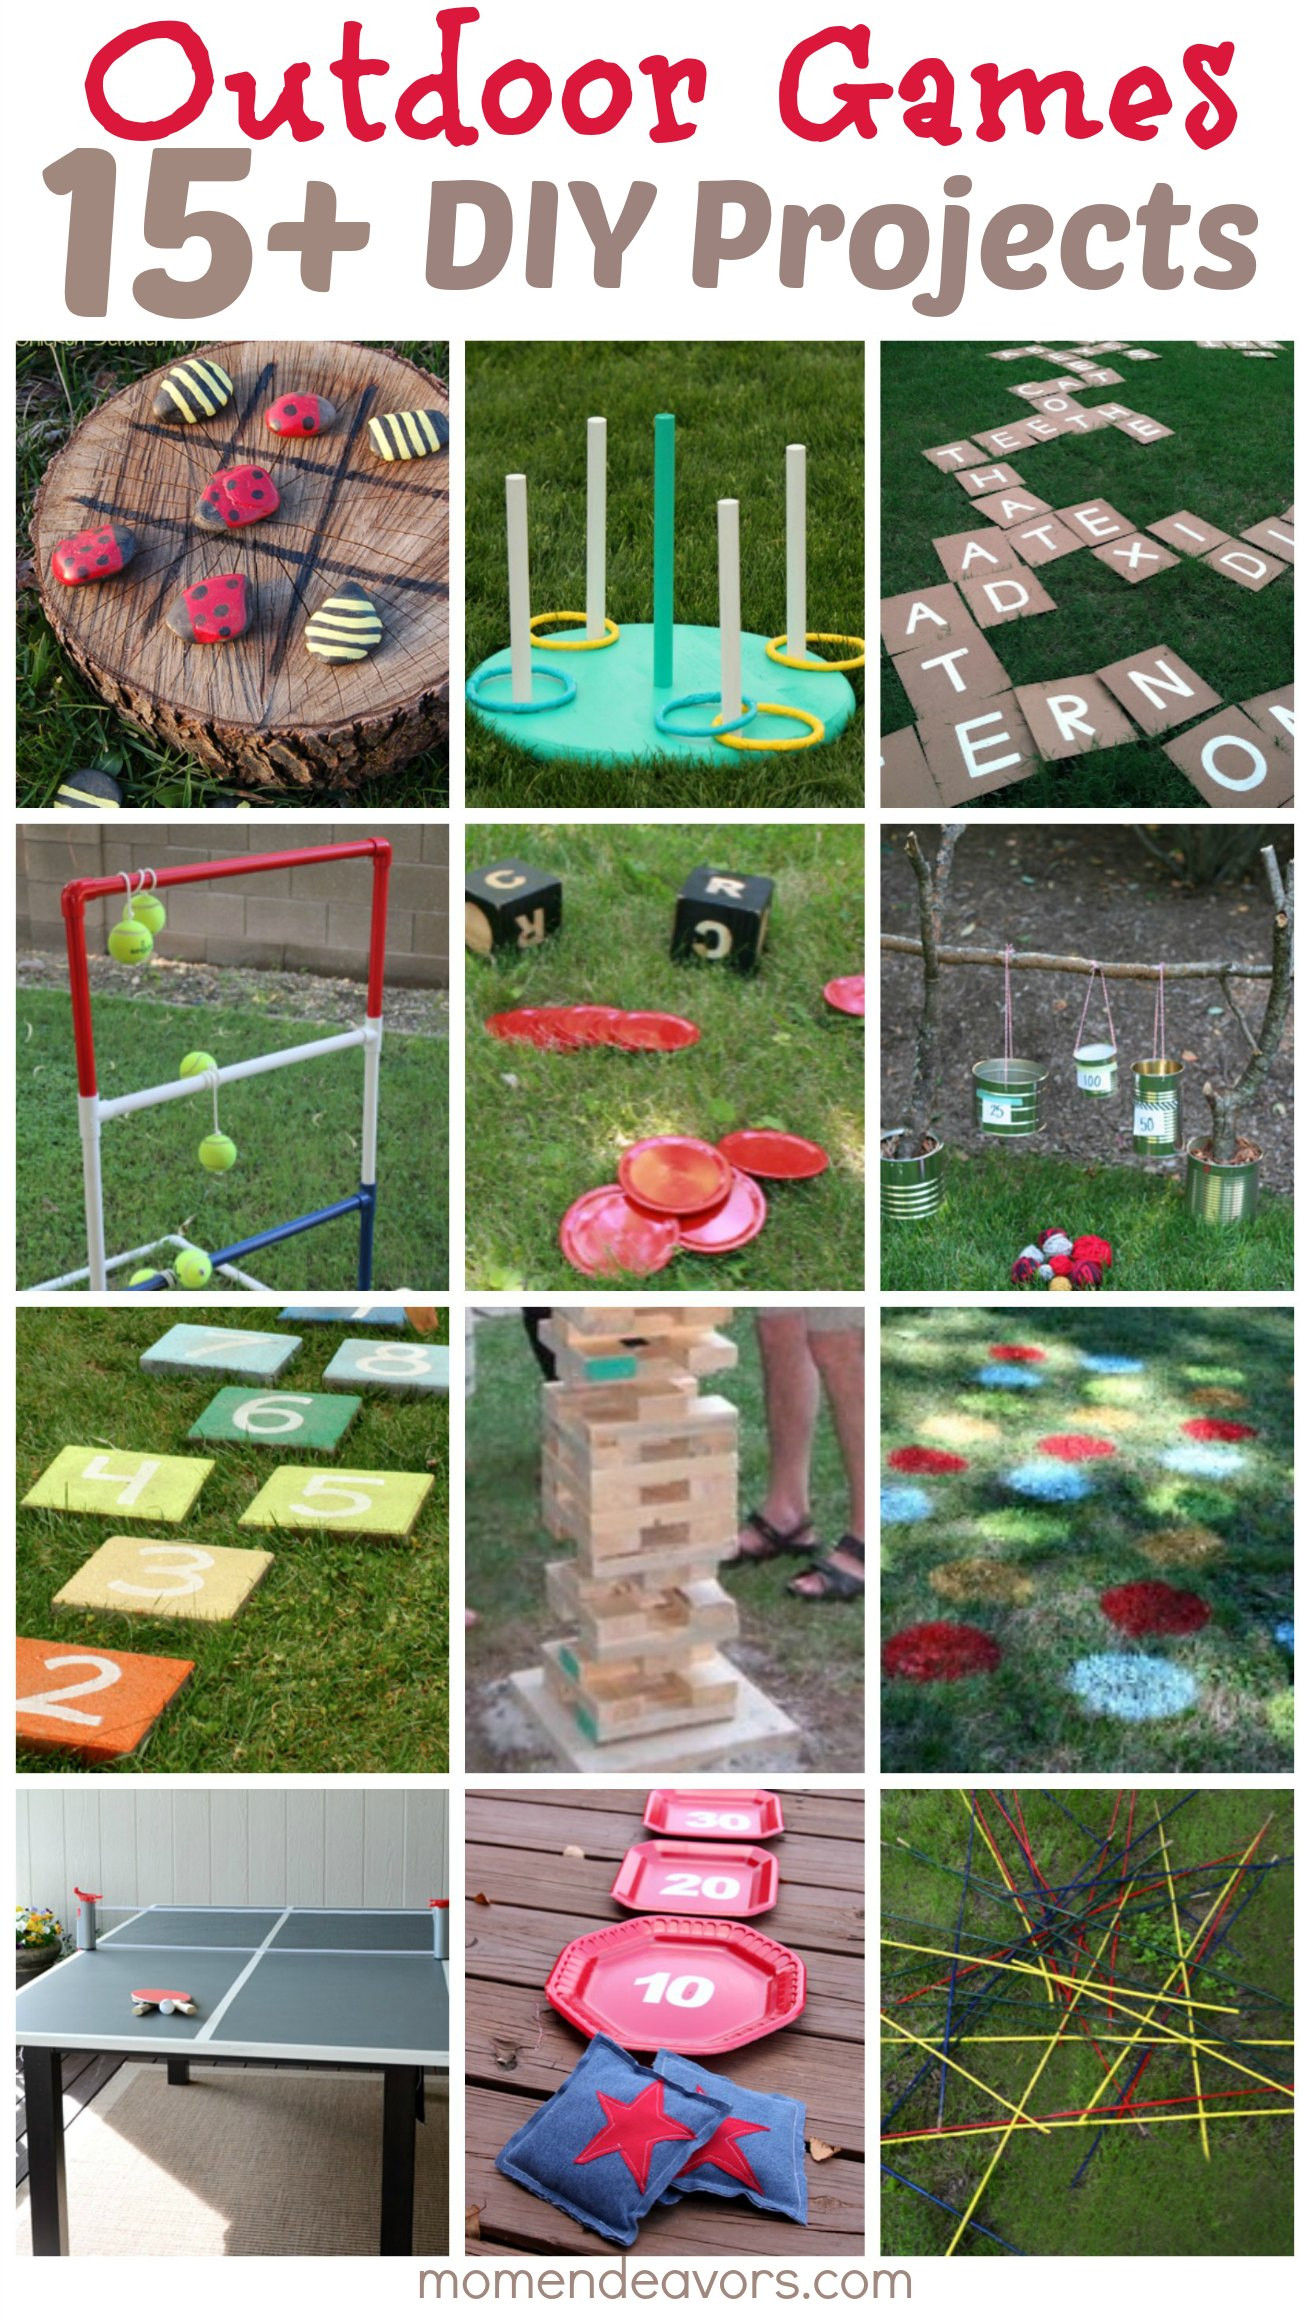 Outdoor DIY Games
 DIY Outdoor Games – 15 Awesome Project Ideas for Backyard